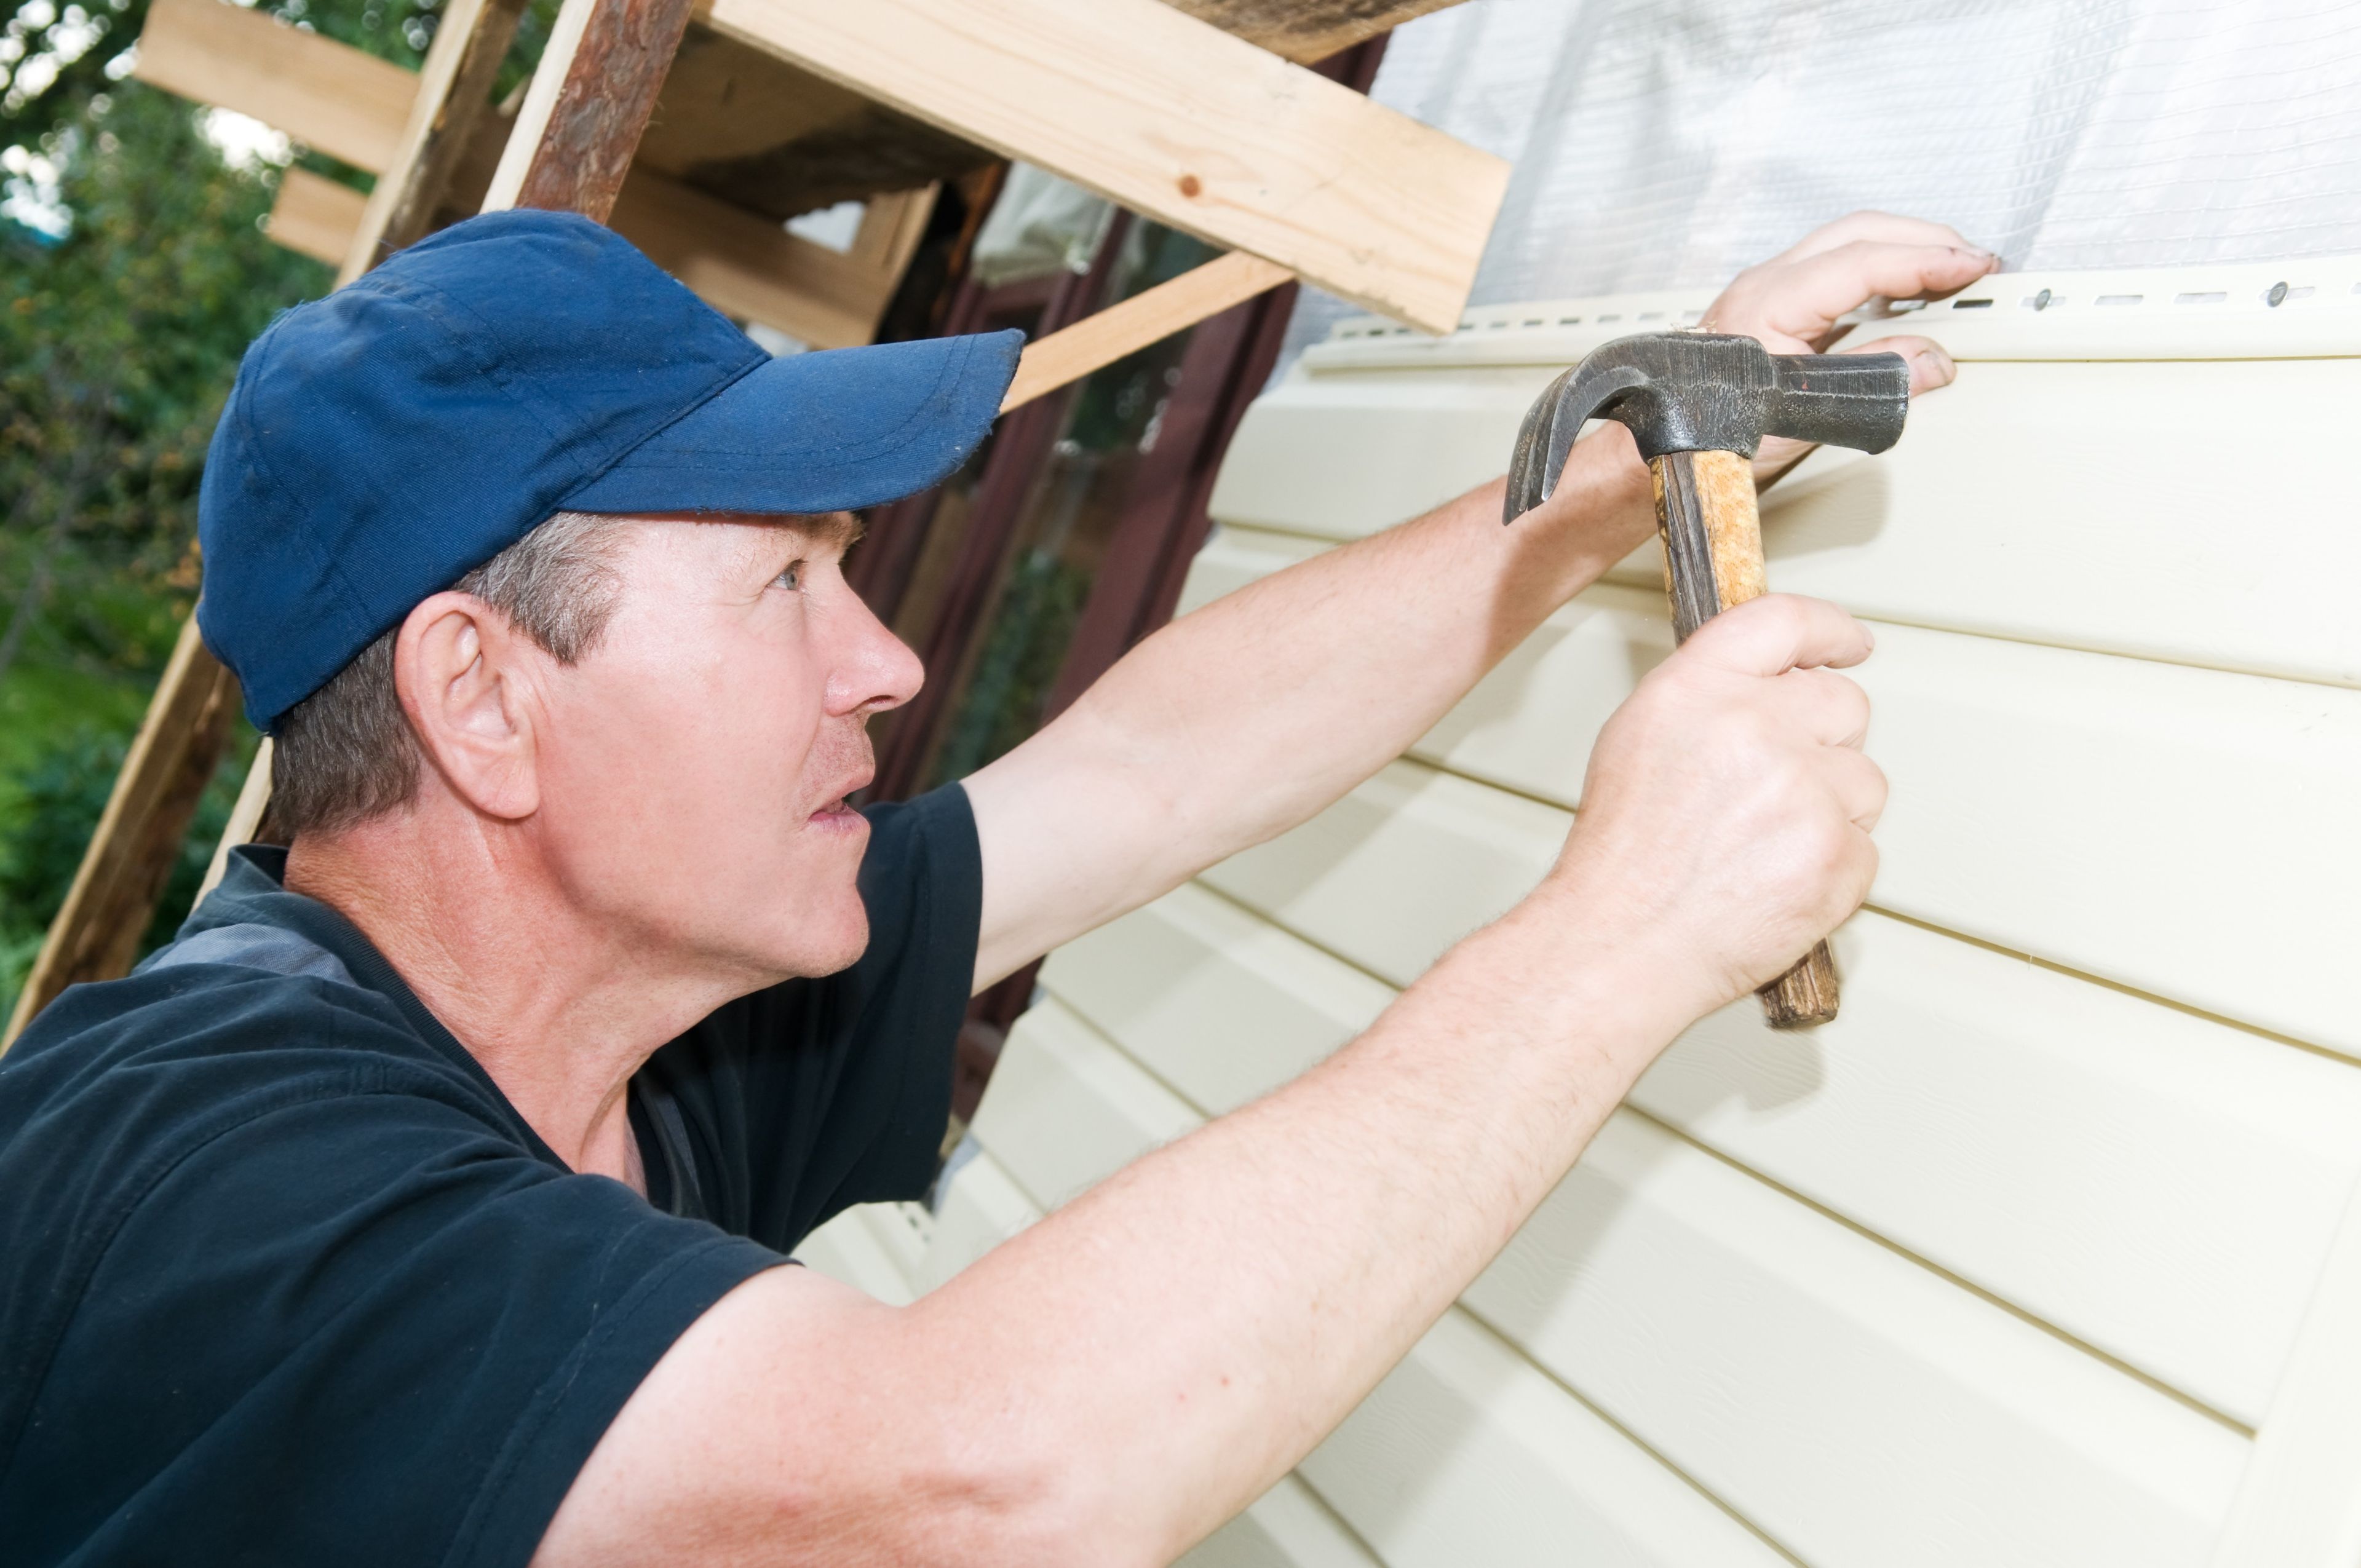 Finding Quality Vinyl Siding Installation in Waldorf, MD, Helps Give Your Home a Brand-New Look